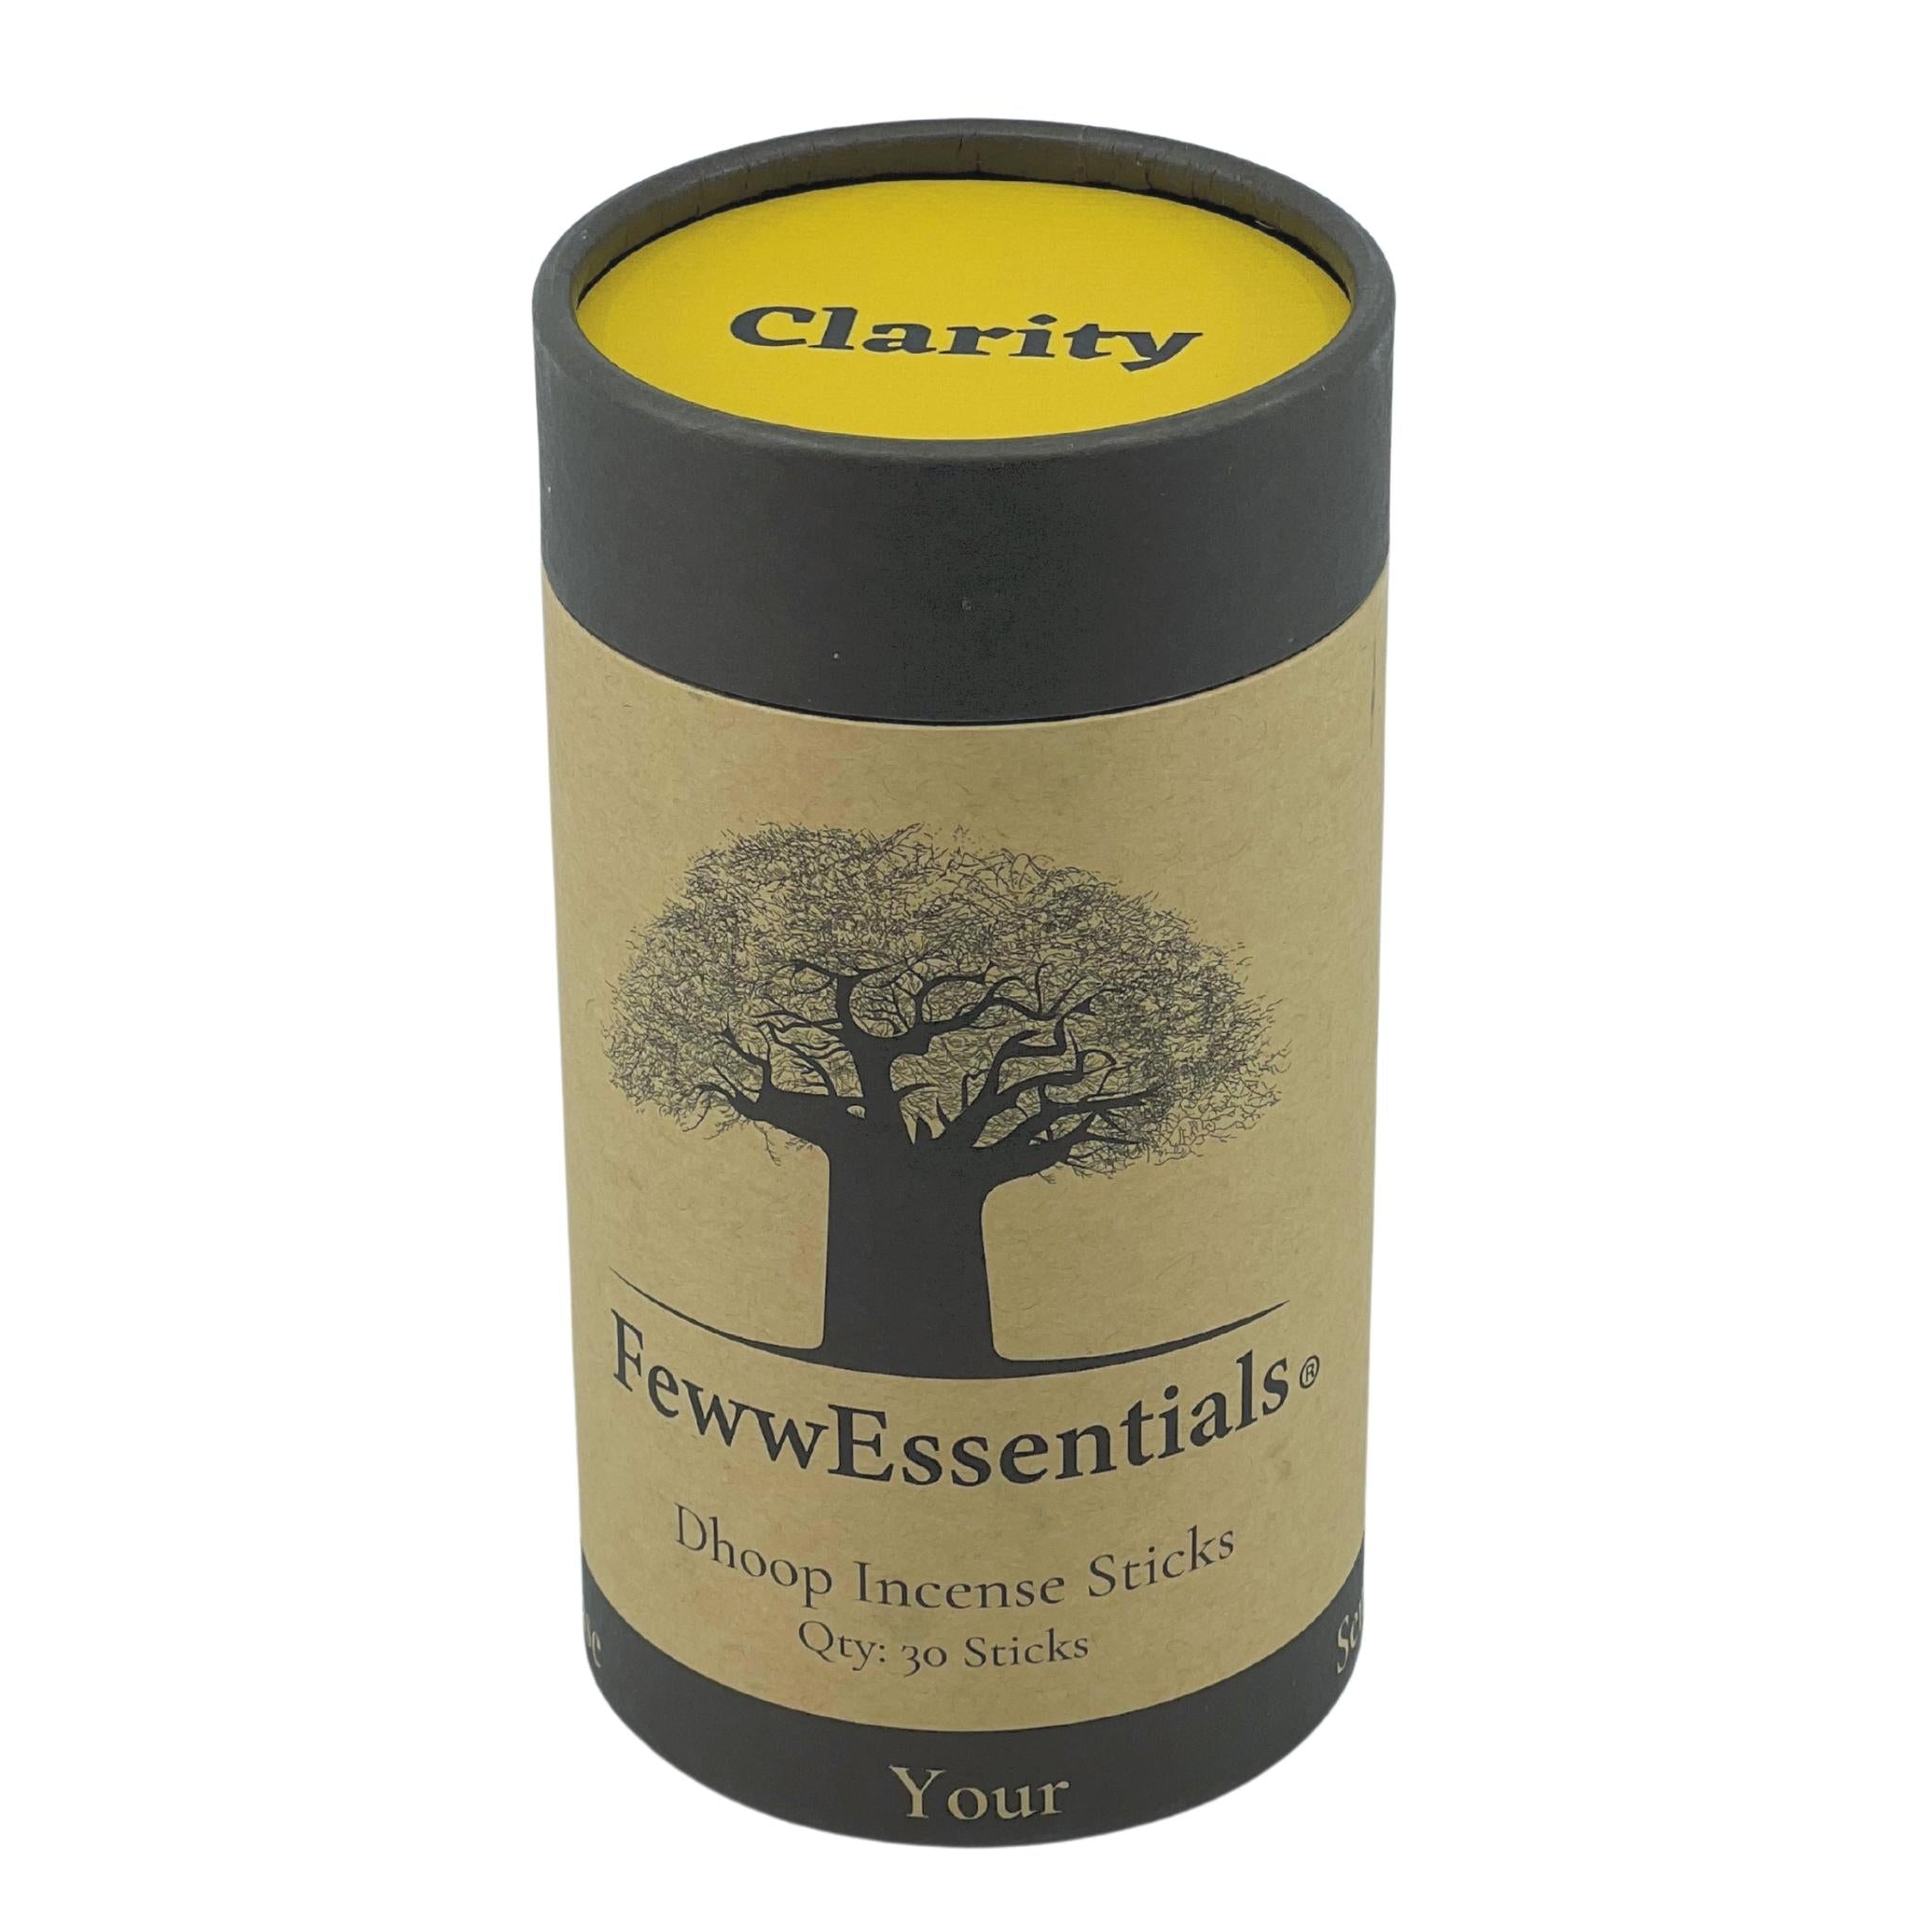 Image of FewwEssentials Dhoop Incense Sticks with the scent name Clarity in a Circular Kraft Brown Box with Yellow Lid